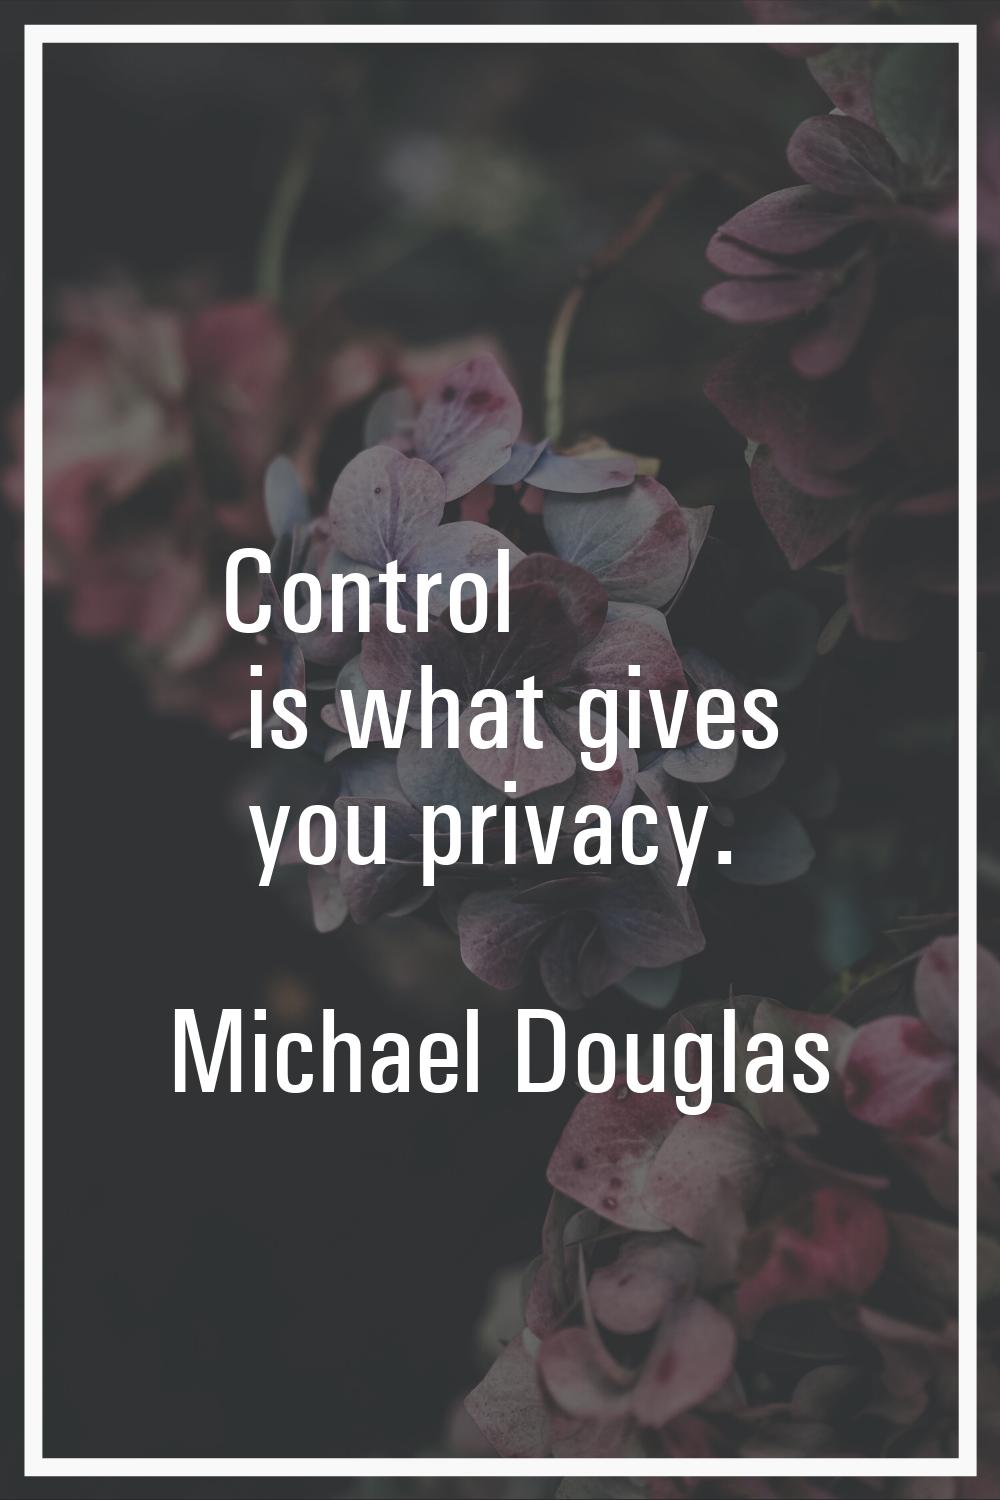 Control is what gives you privacy.